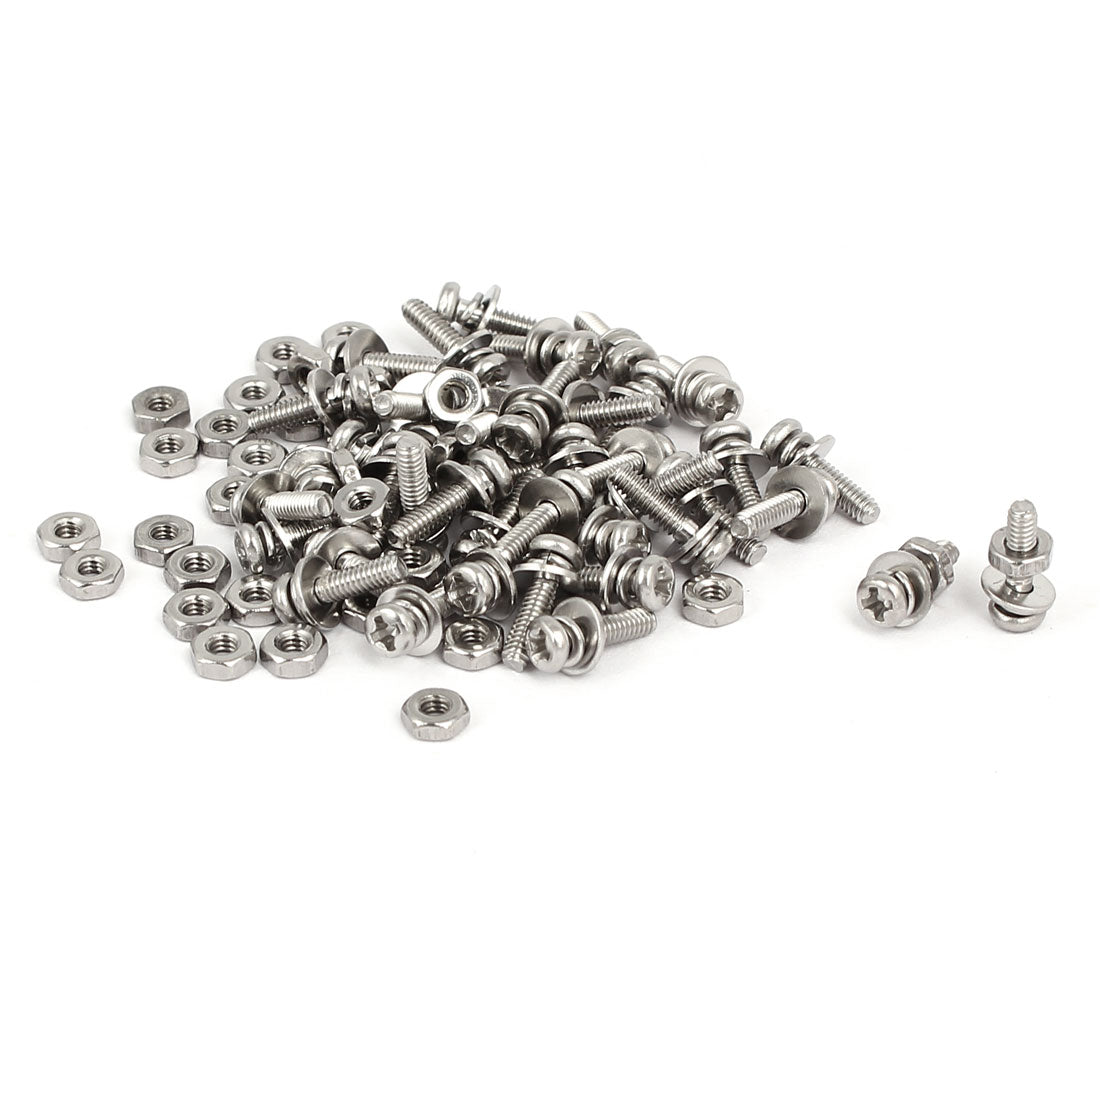 uxcell Uxcell M2 x 8mm 304 Stainless Steel Phillips Pan Head Screws Nuts w Washers 40 Sets